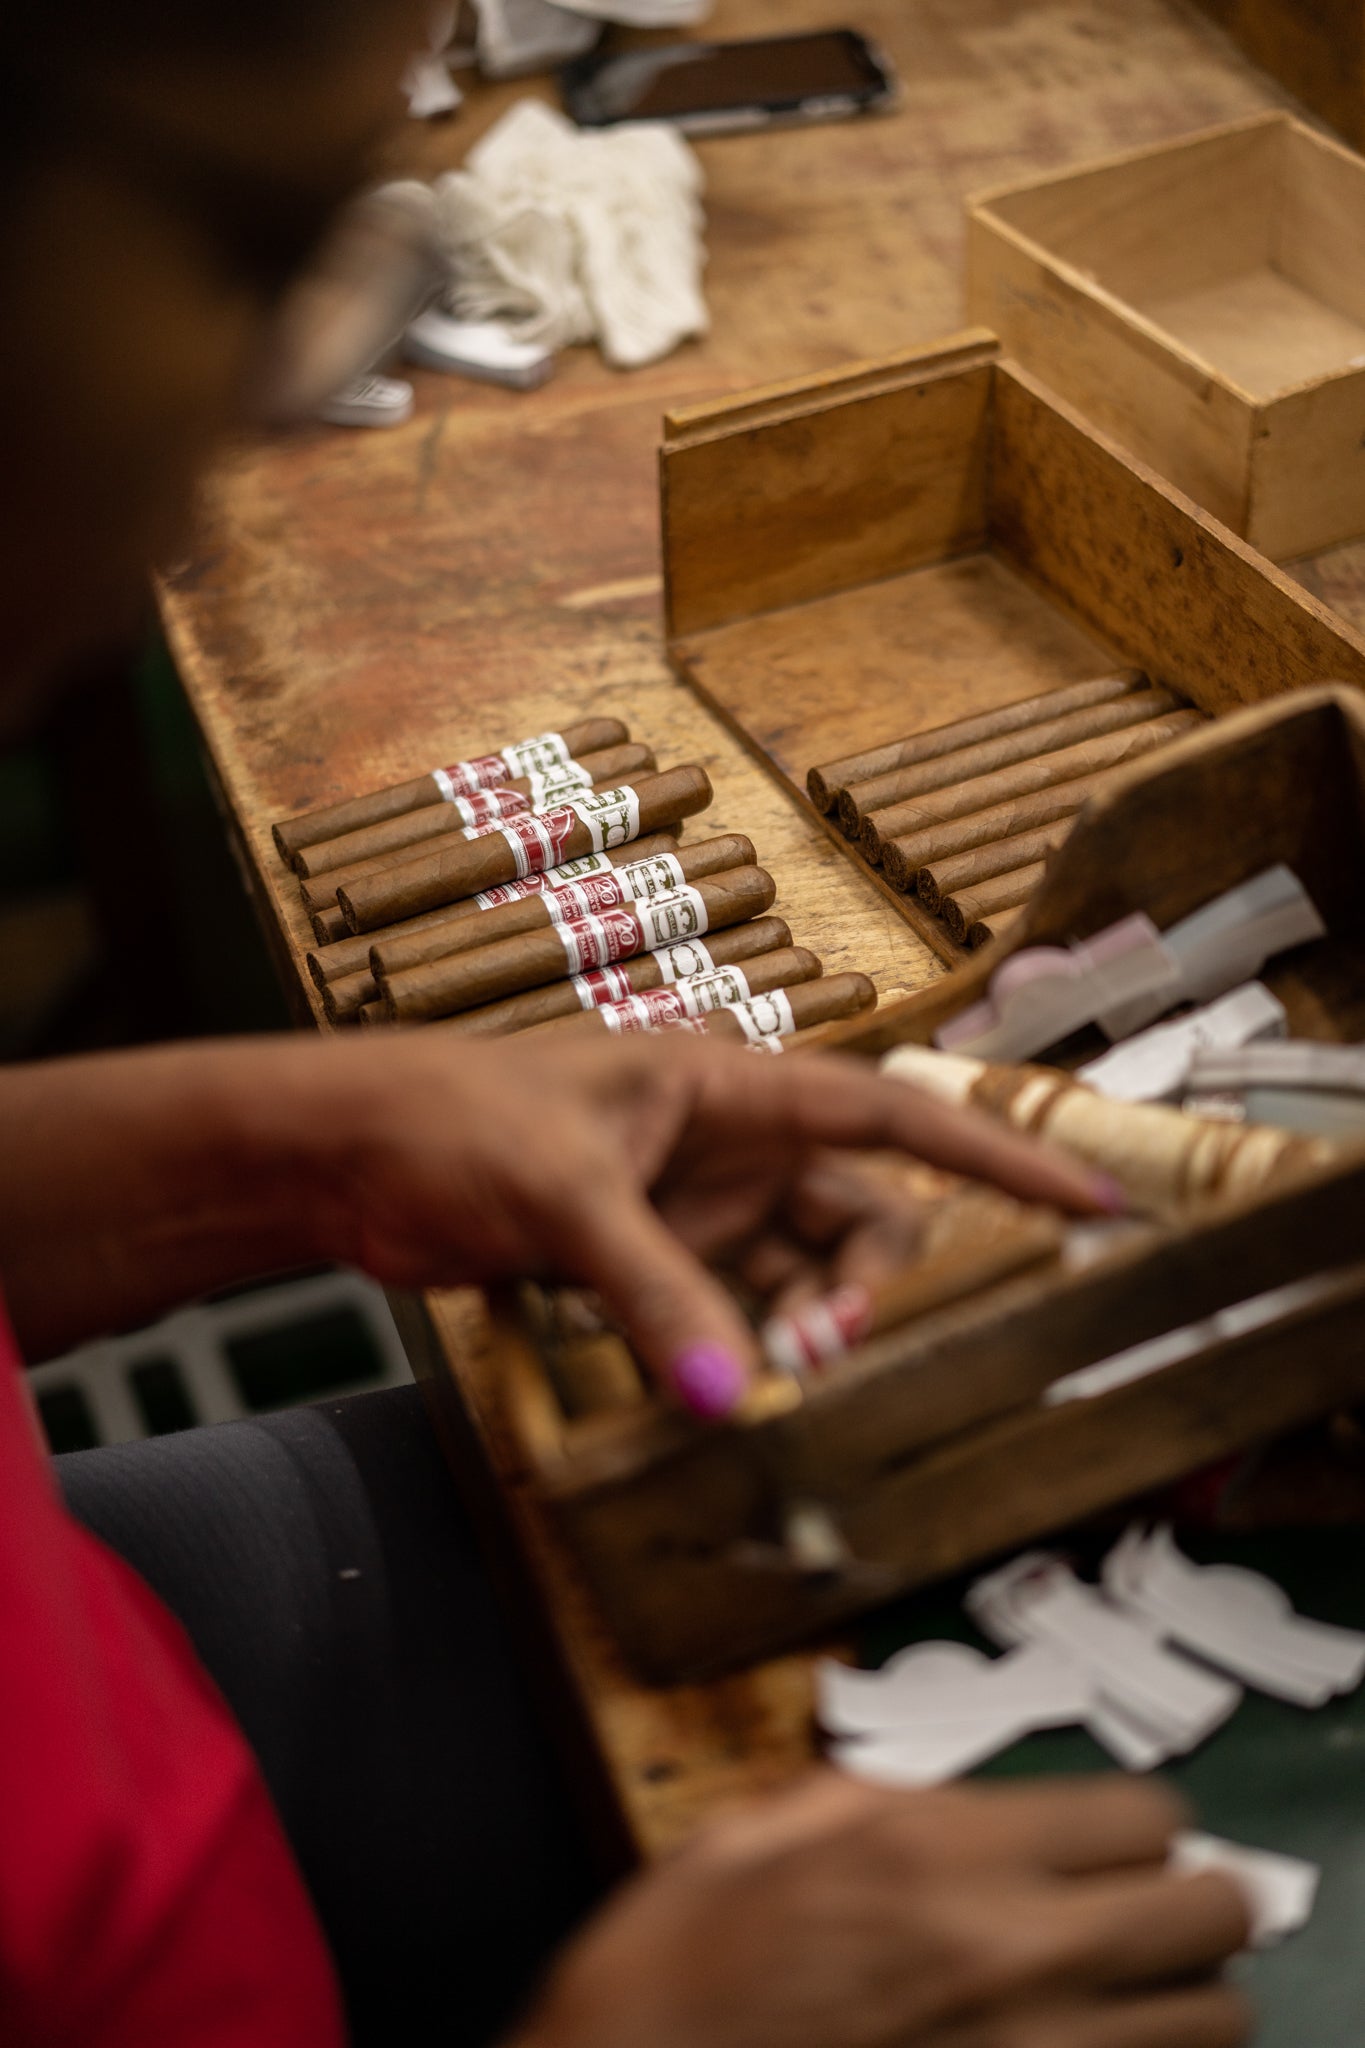 Banding and boxing the final cigars.